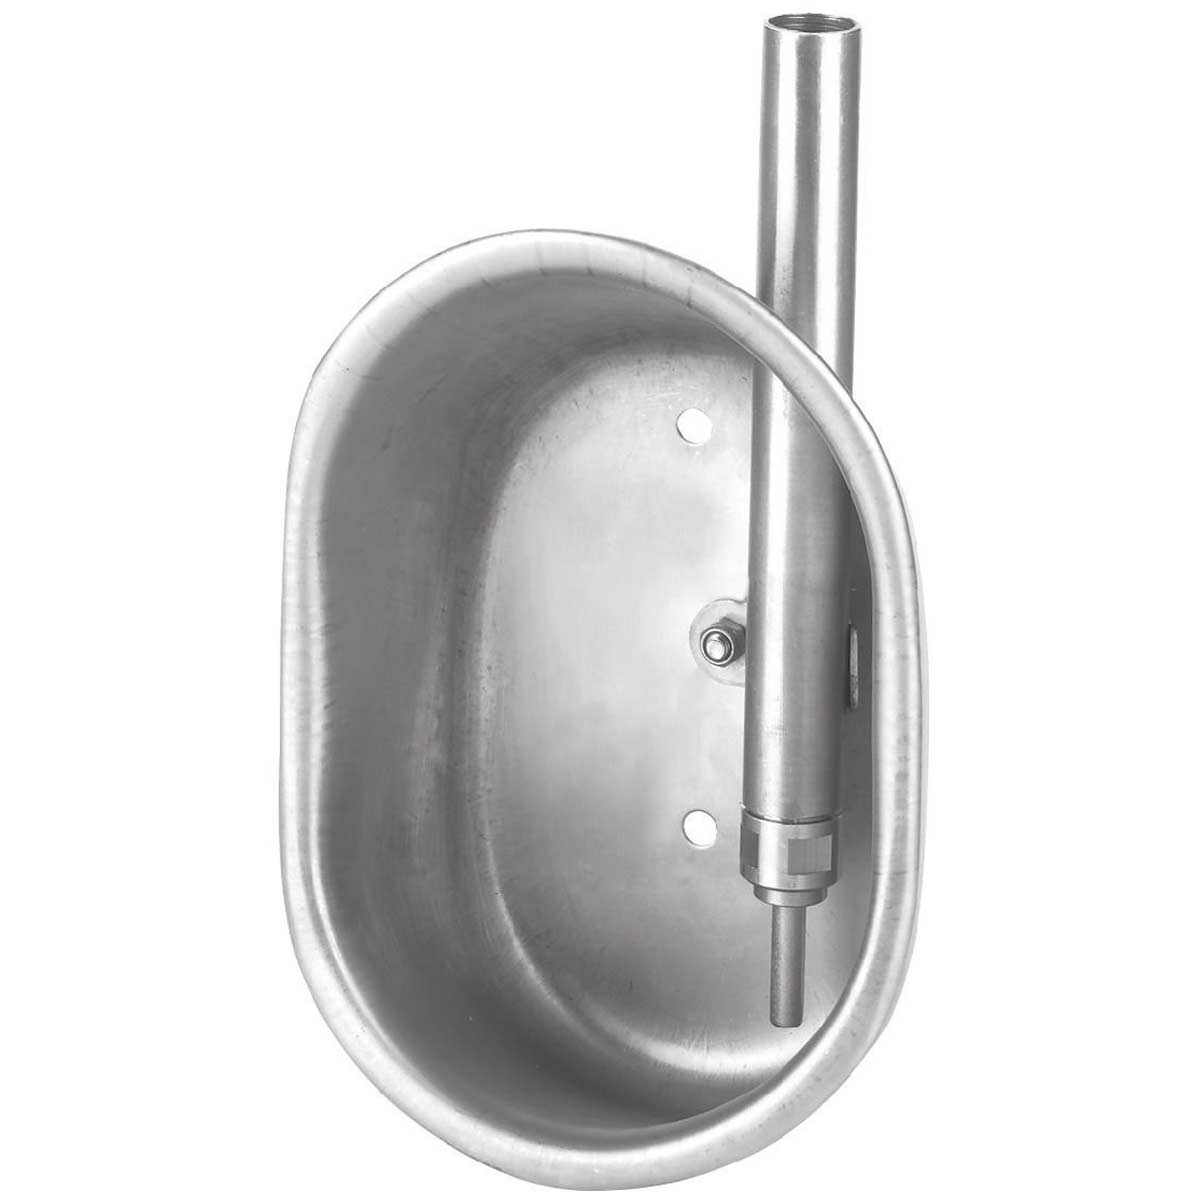 Water bowl for pigs stainless steel